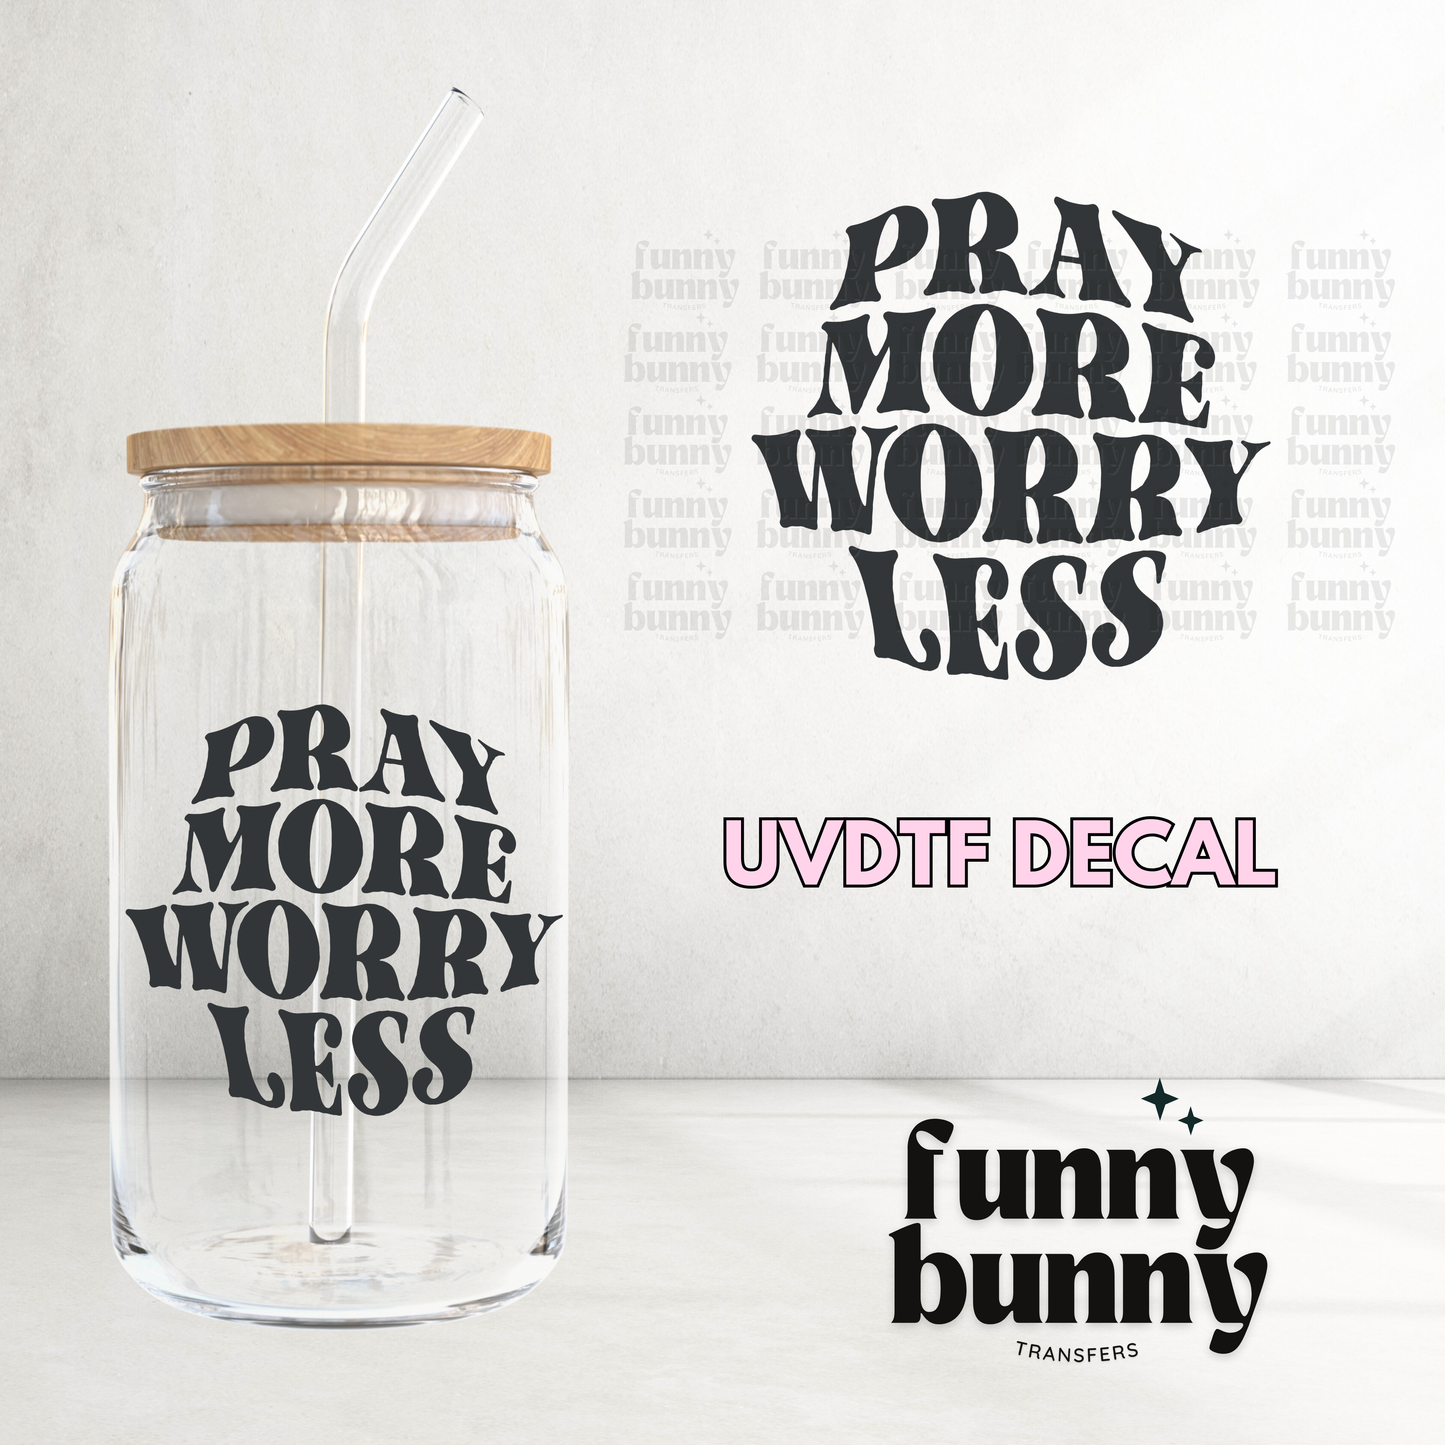 Pray More Worry Less - UVDTF Decal